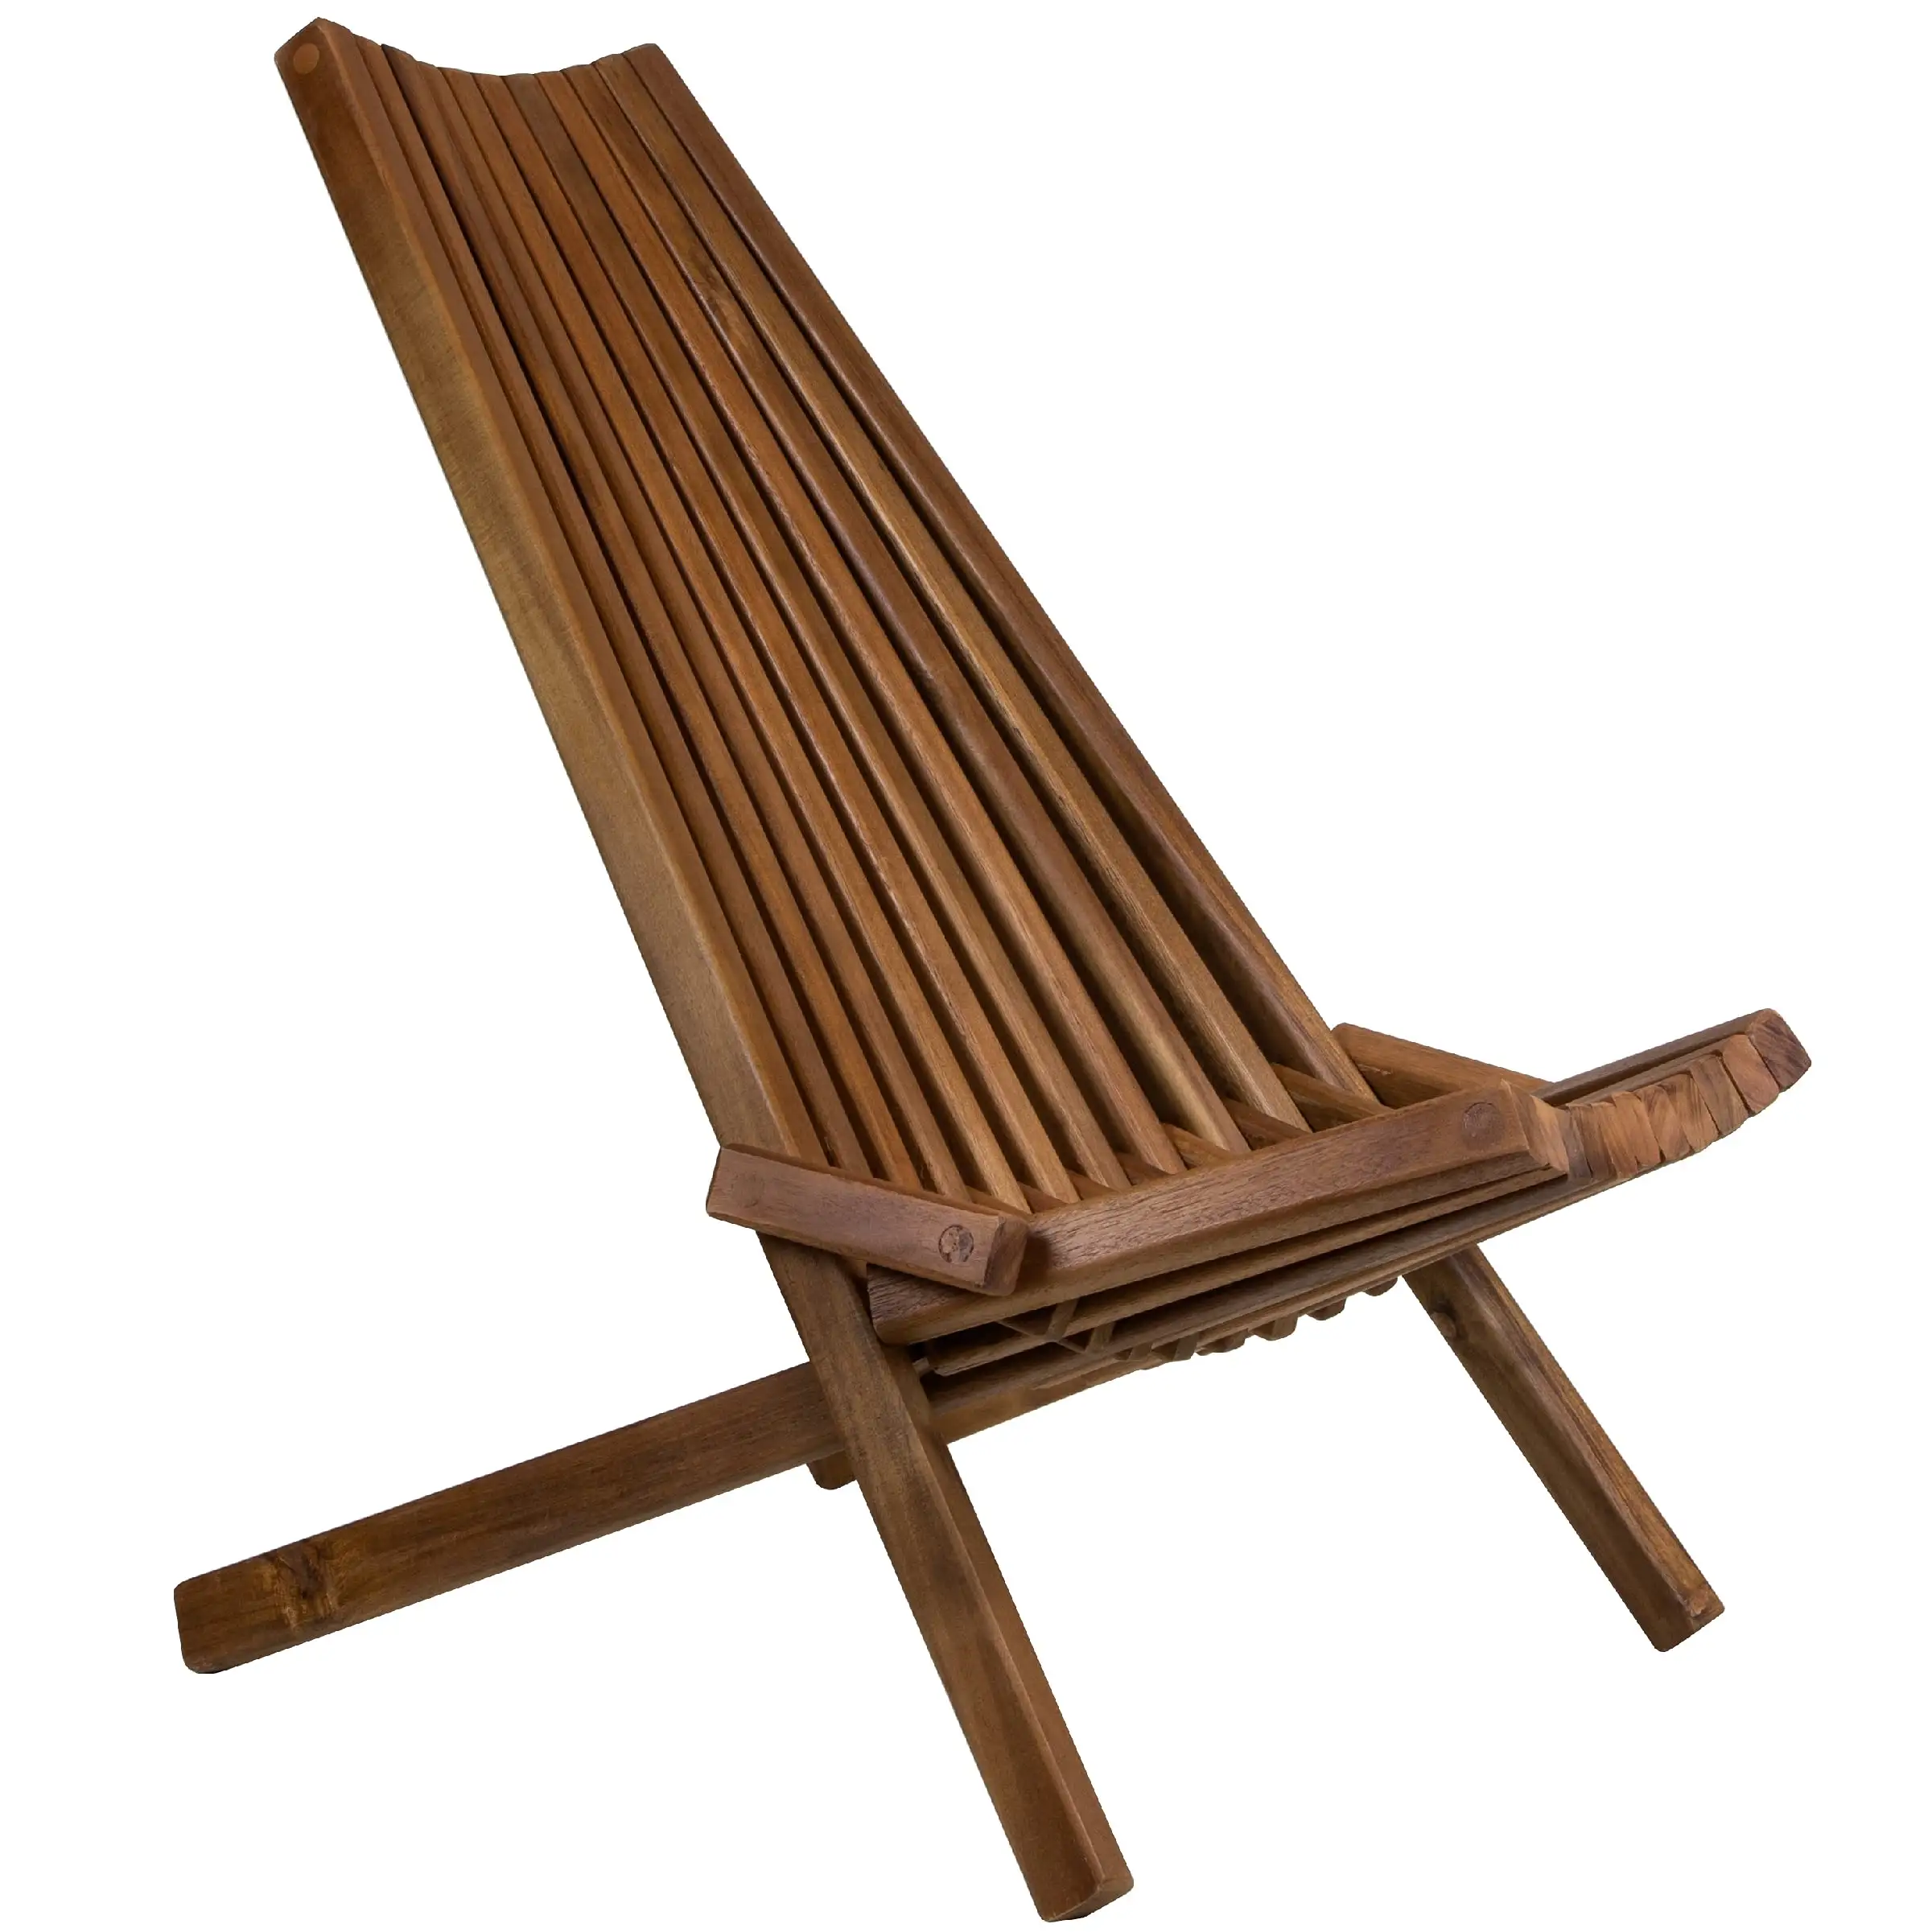 Folding Wooden Lounge Chair garden chairs patio chairs outdoor for Garden Home Furniture